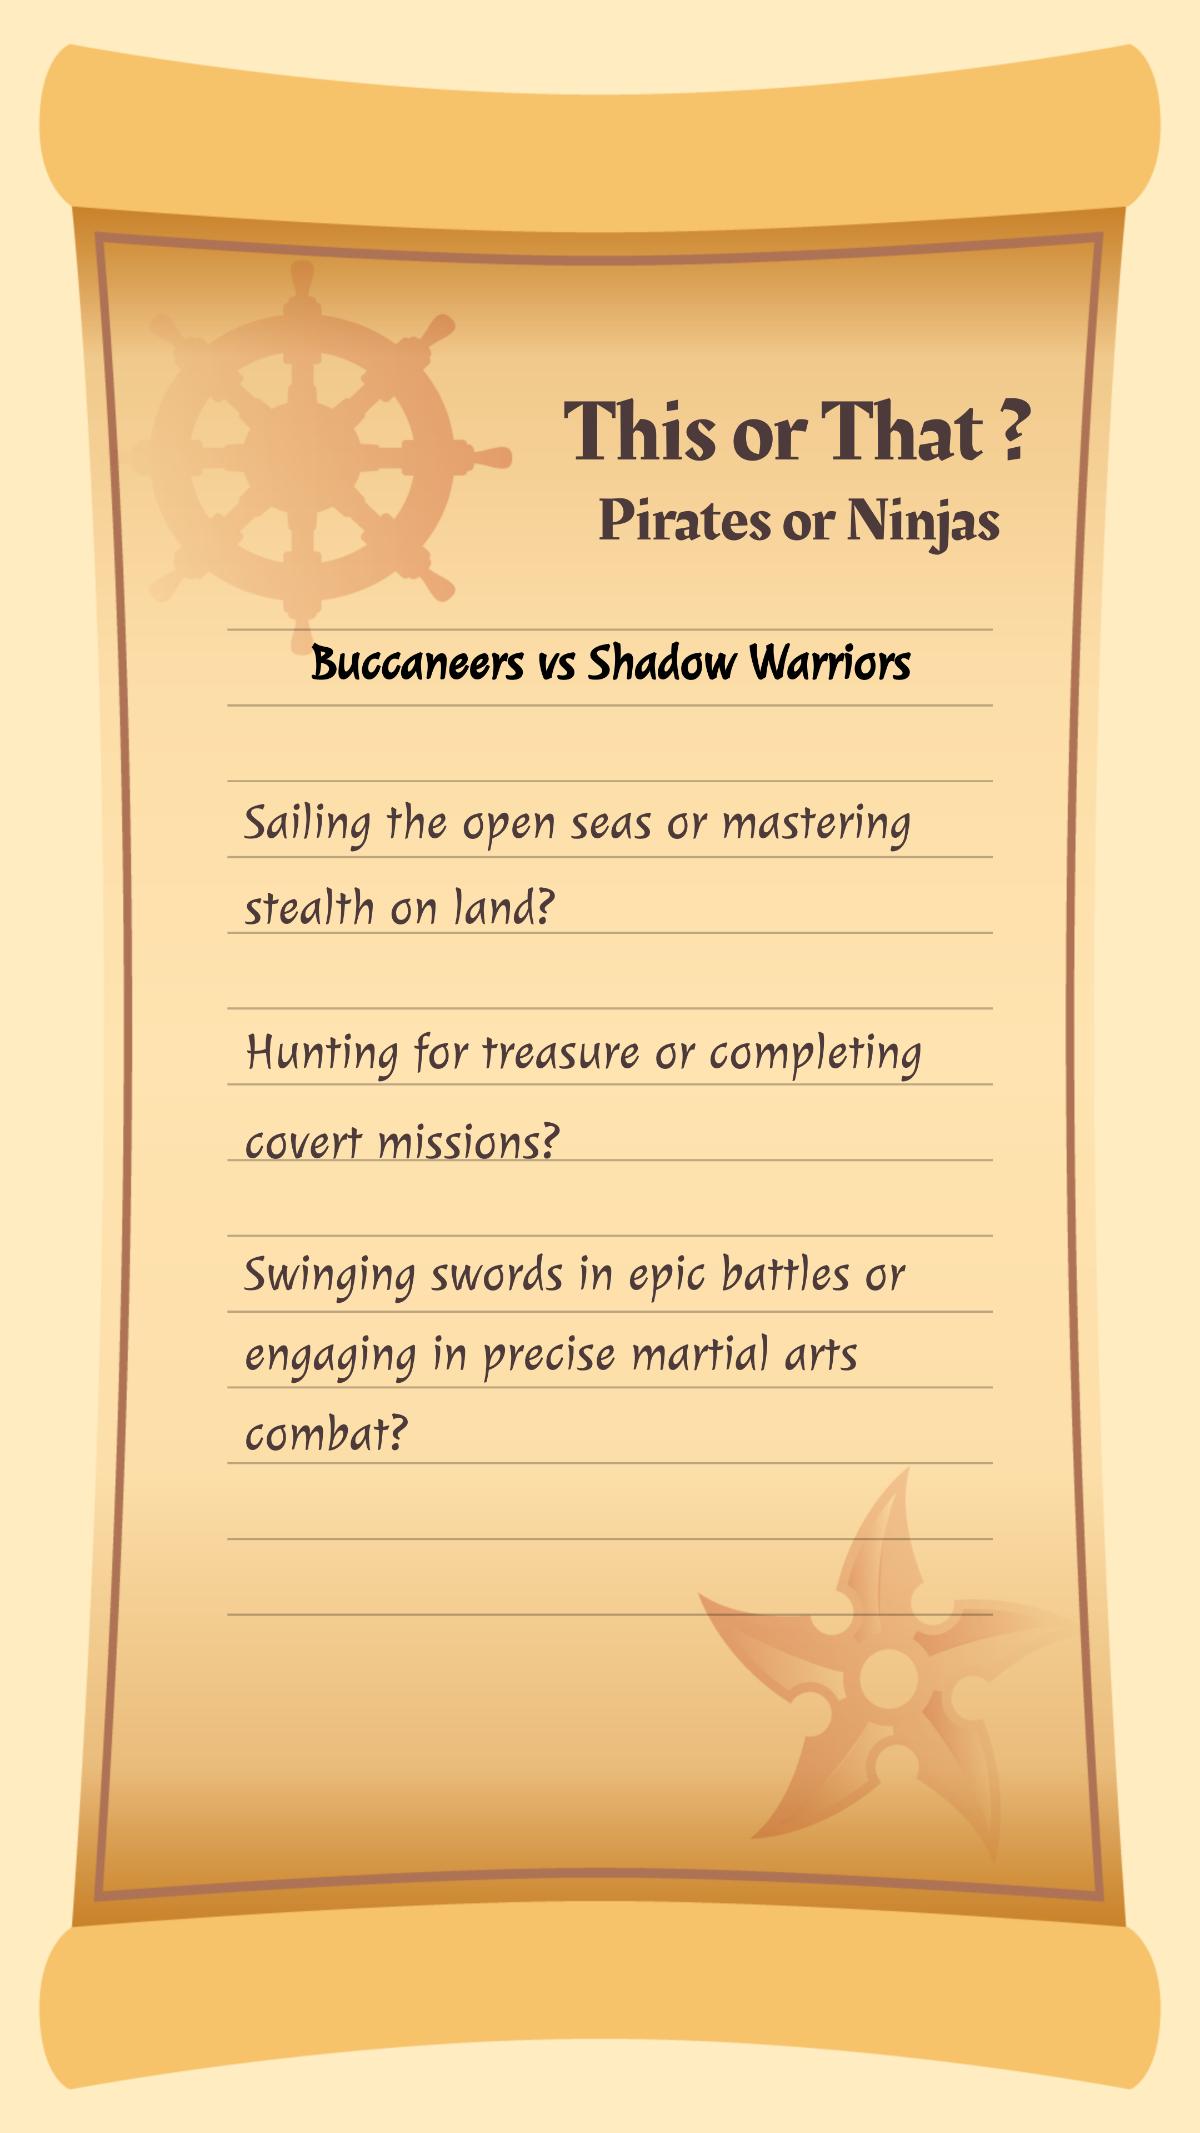 Pirates or Ninjas This or That Instagram Post